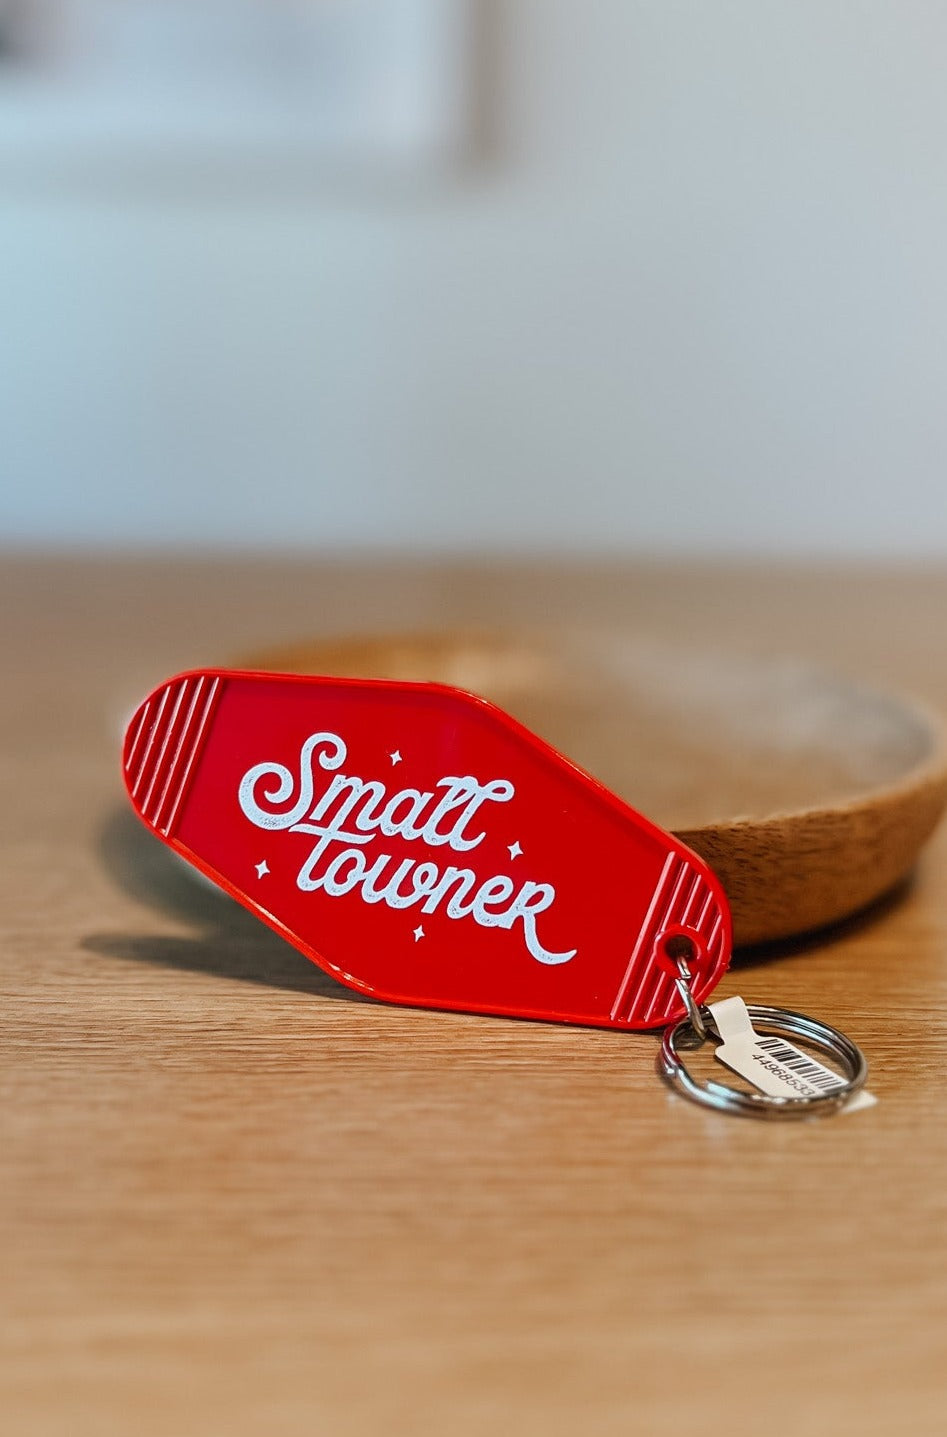 Small Towner Vintage Motel Keychain